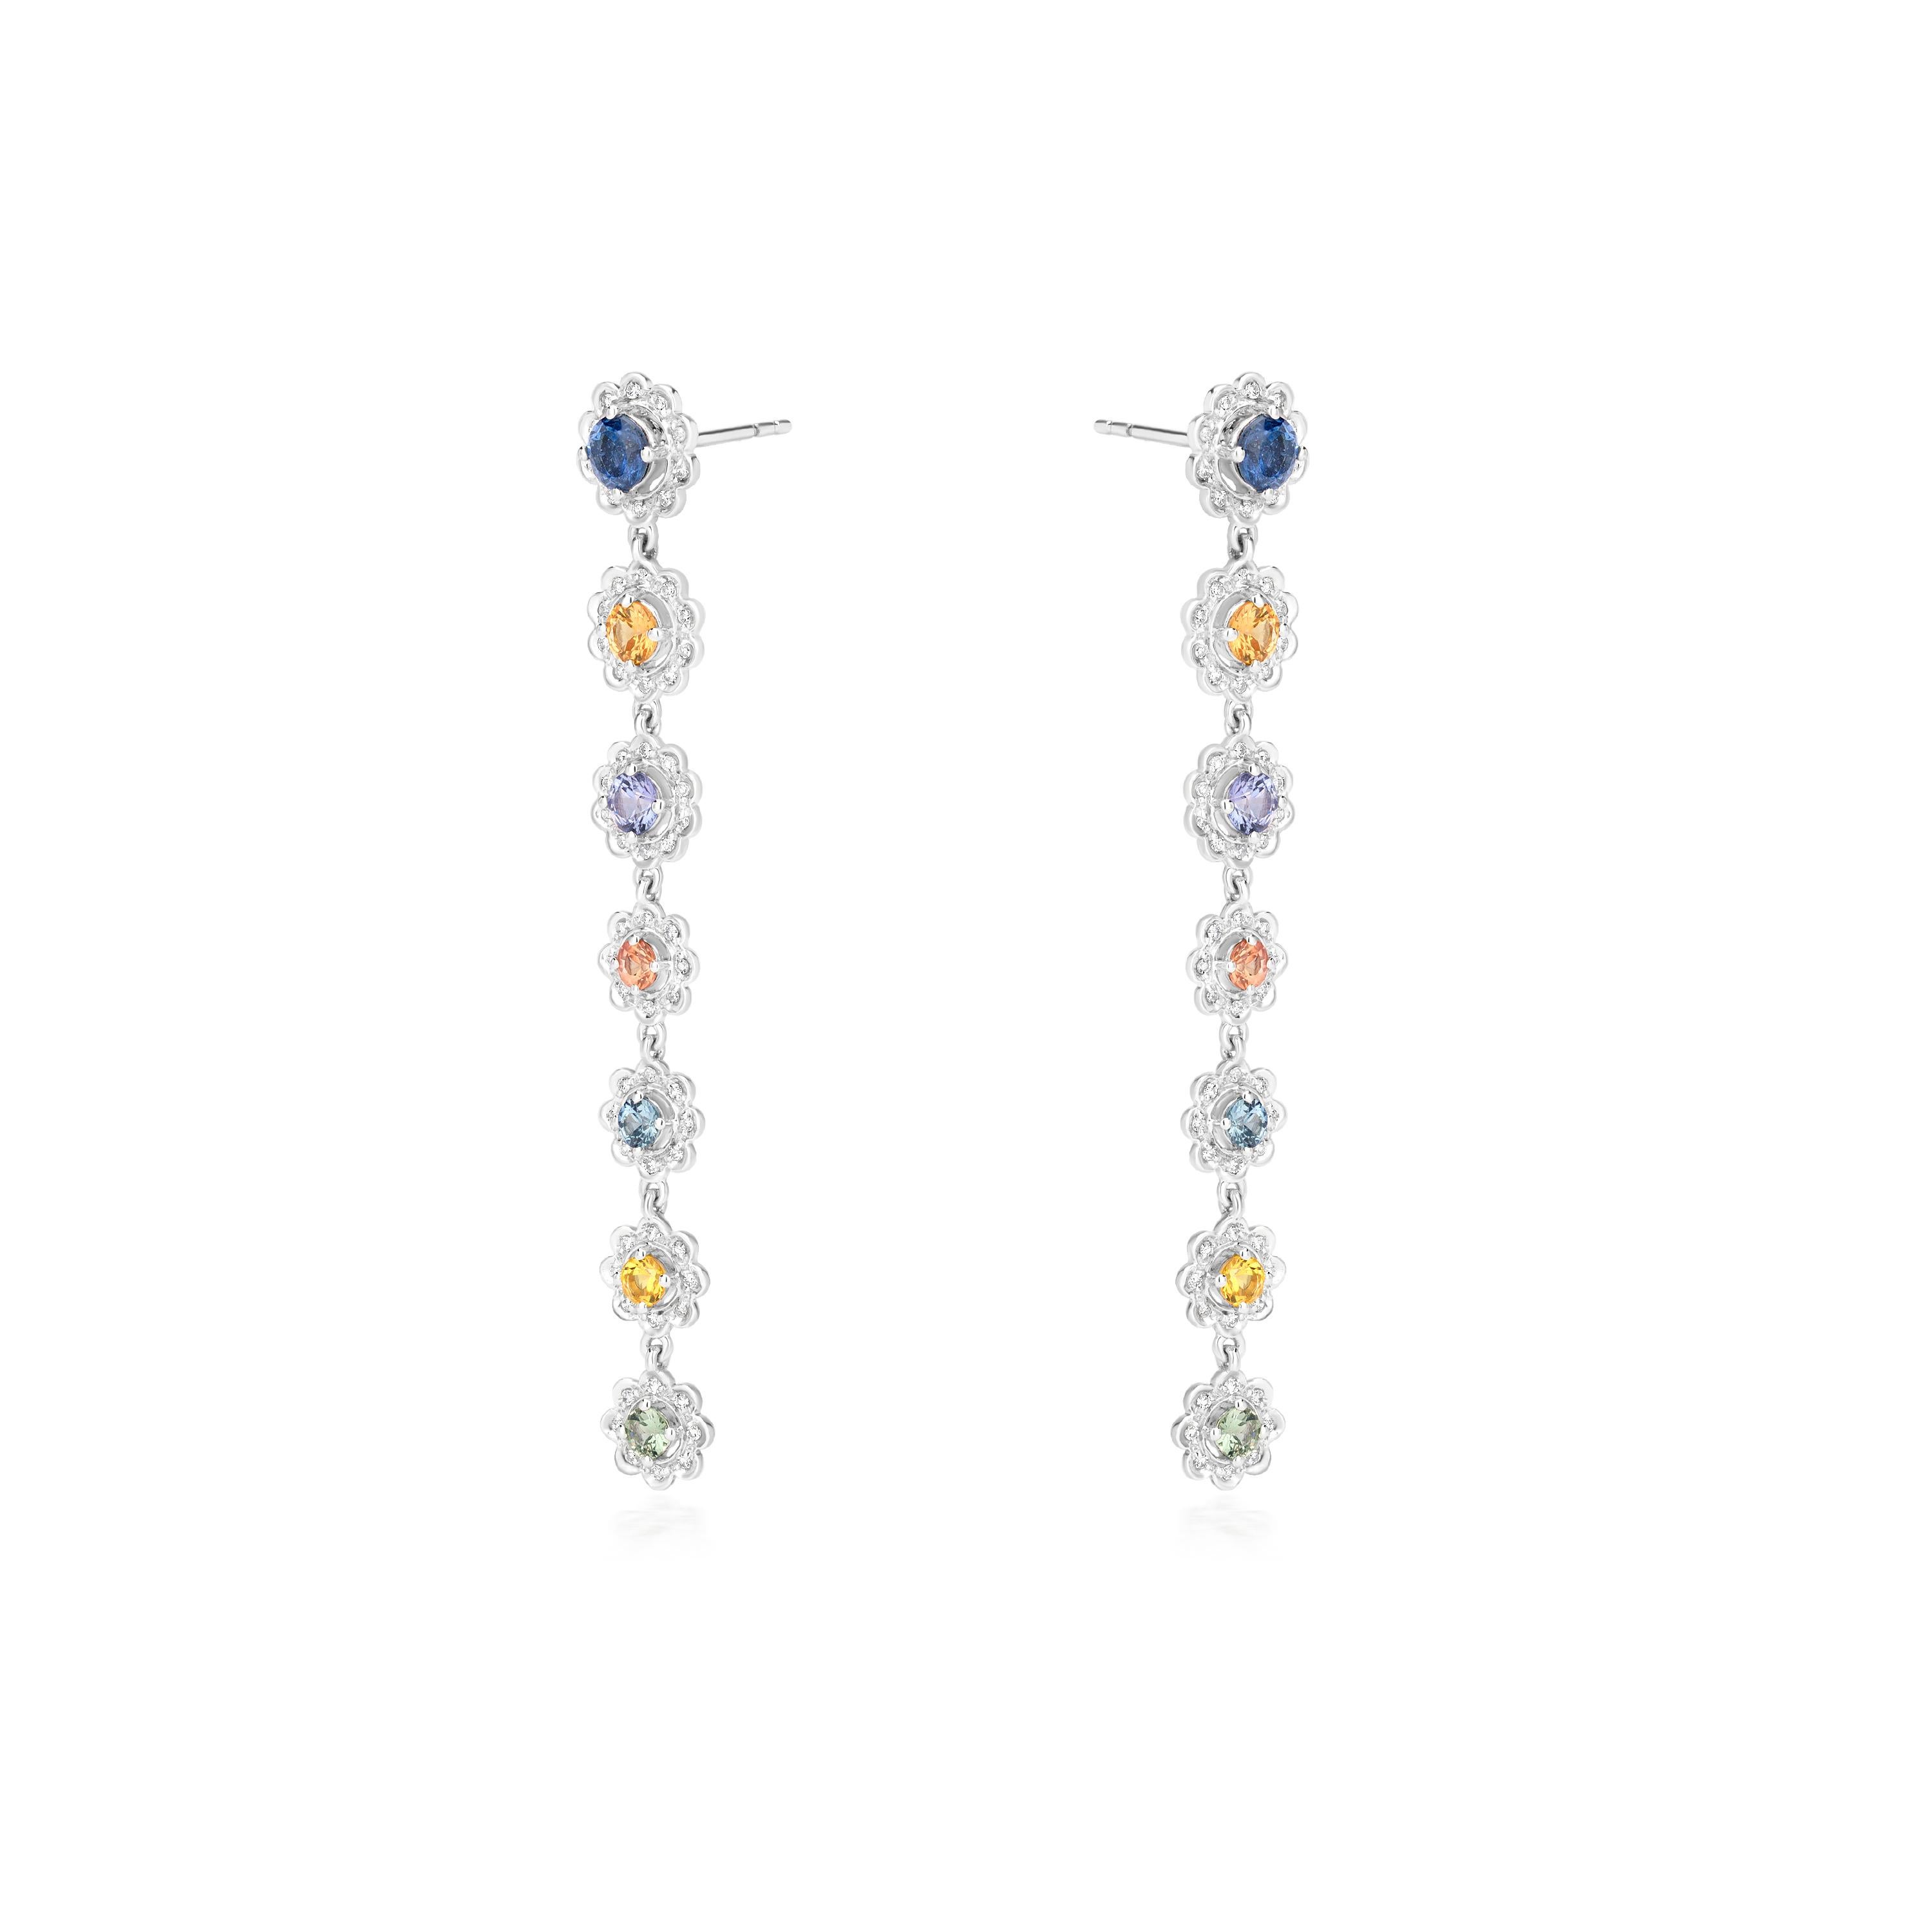 These Gemistry stunning 18k white gold earrings will add a lot of glitter to your attire. To give it a modern jewelry look, these droplets are aligned with colorful 14 sapphires and surrounded by 124 diamonds in a flower shape. The diamonds have a